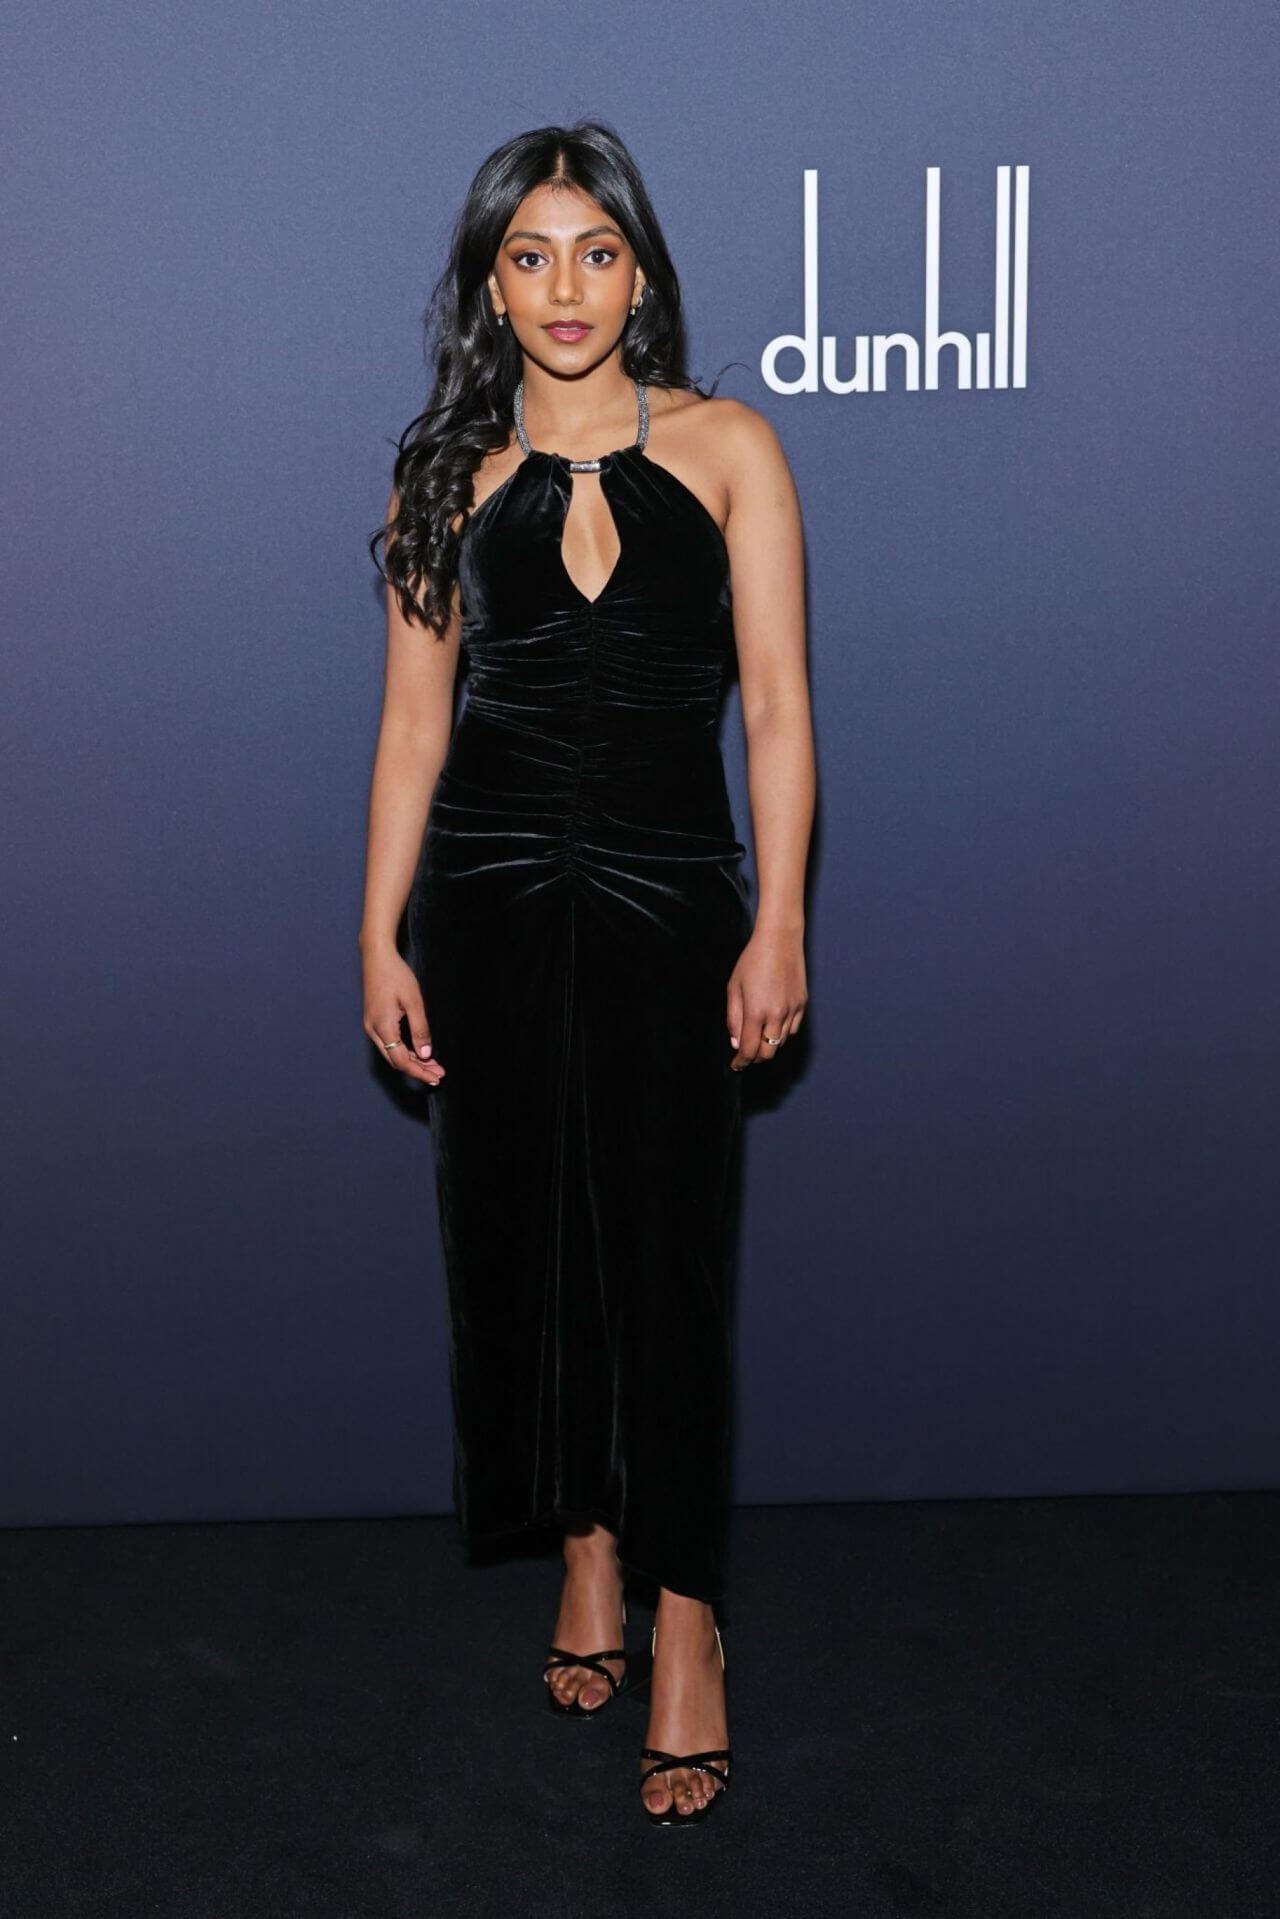 Charithra Chandran In Black Velvet Long Dress At Dunhill & BSBP Pre-BAFTA Filmmakers Dinner and Party in London